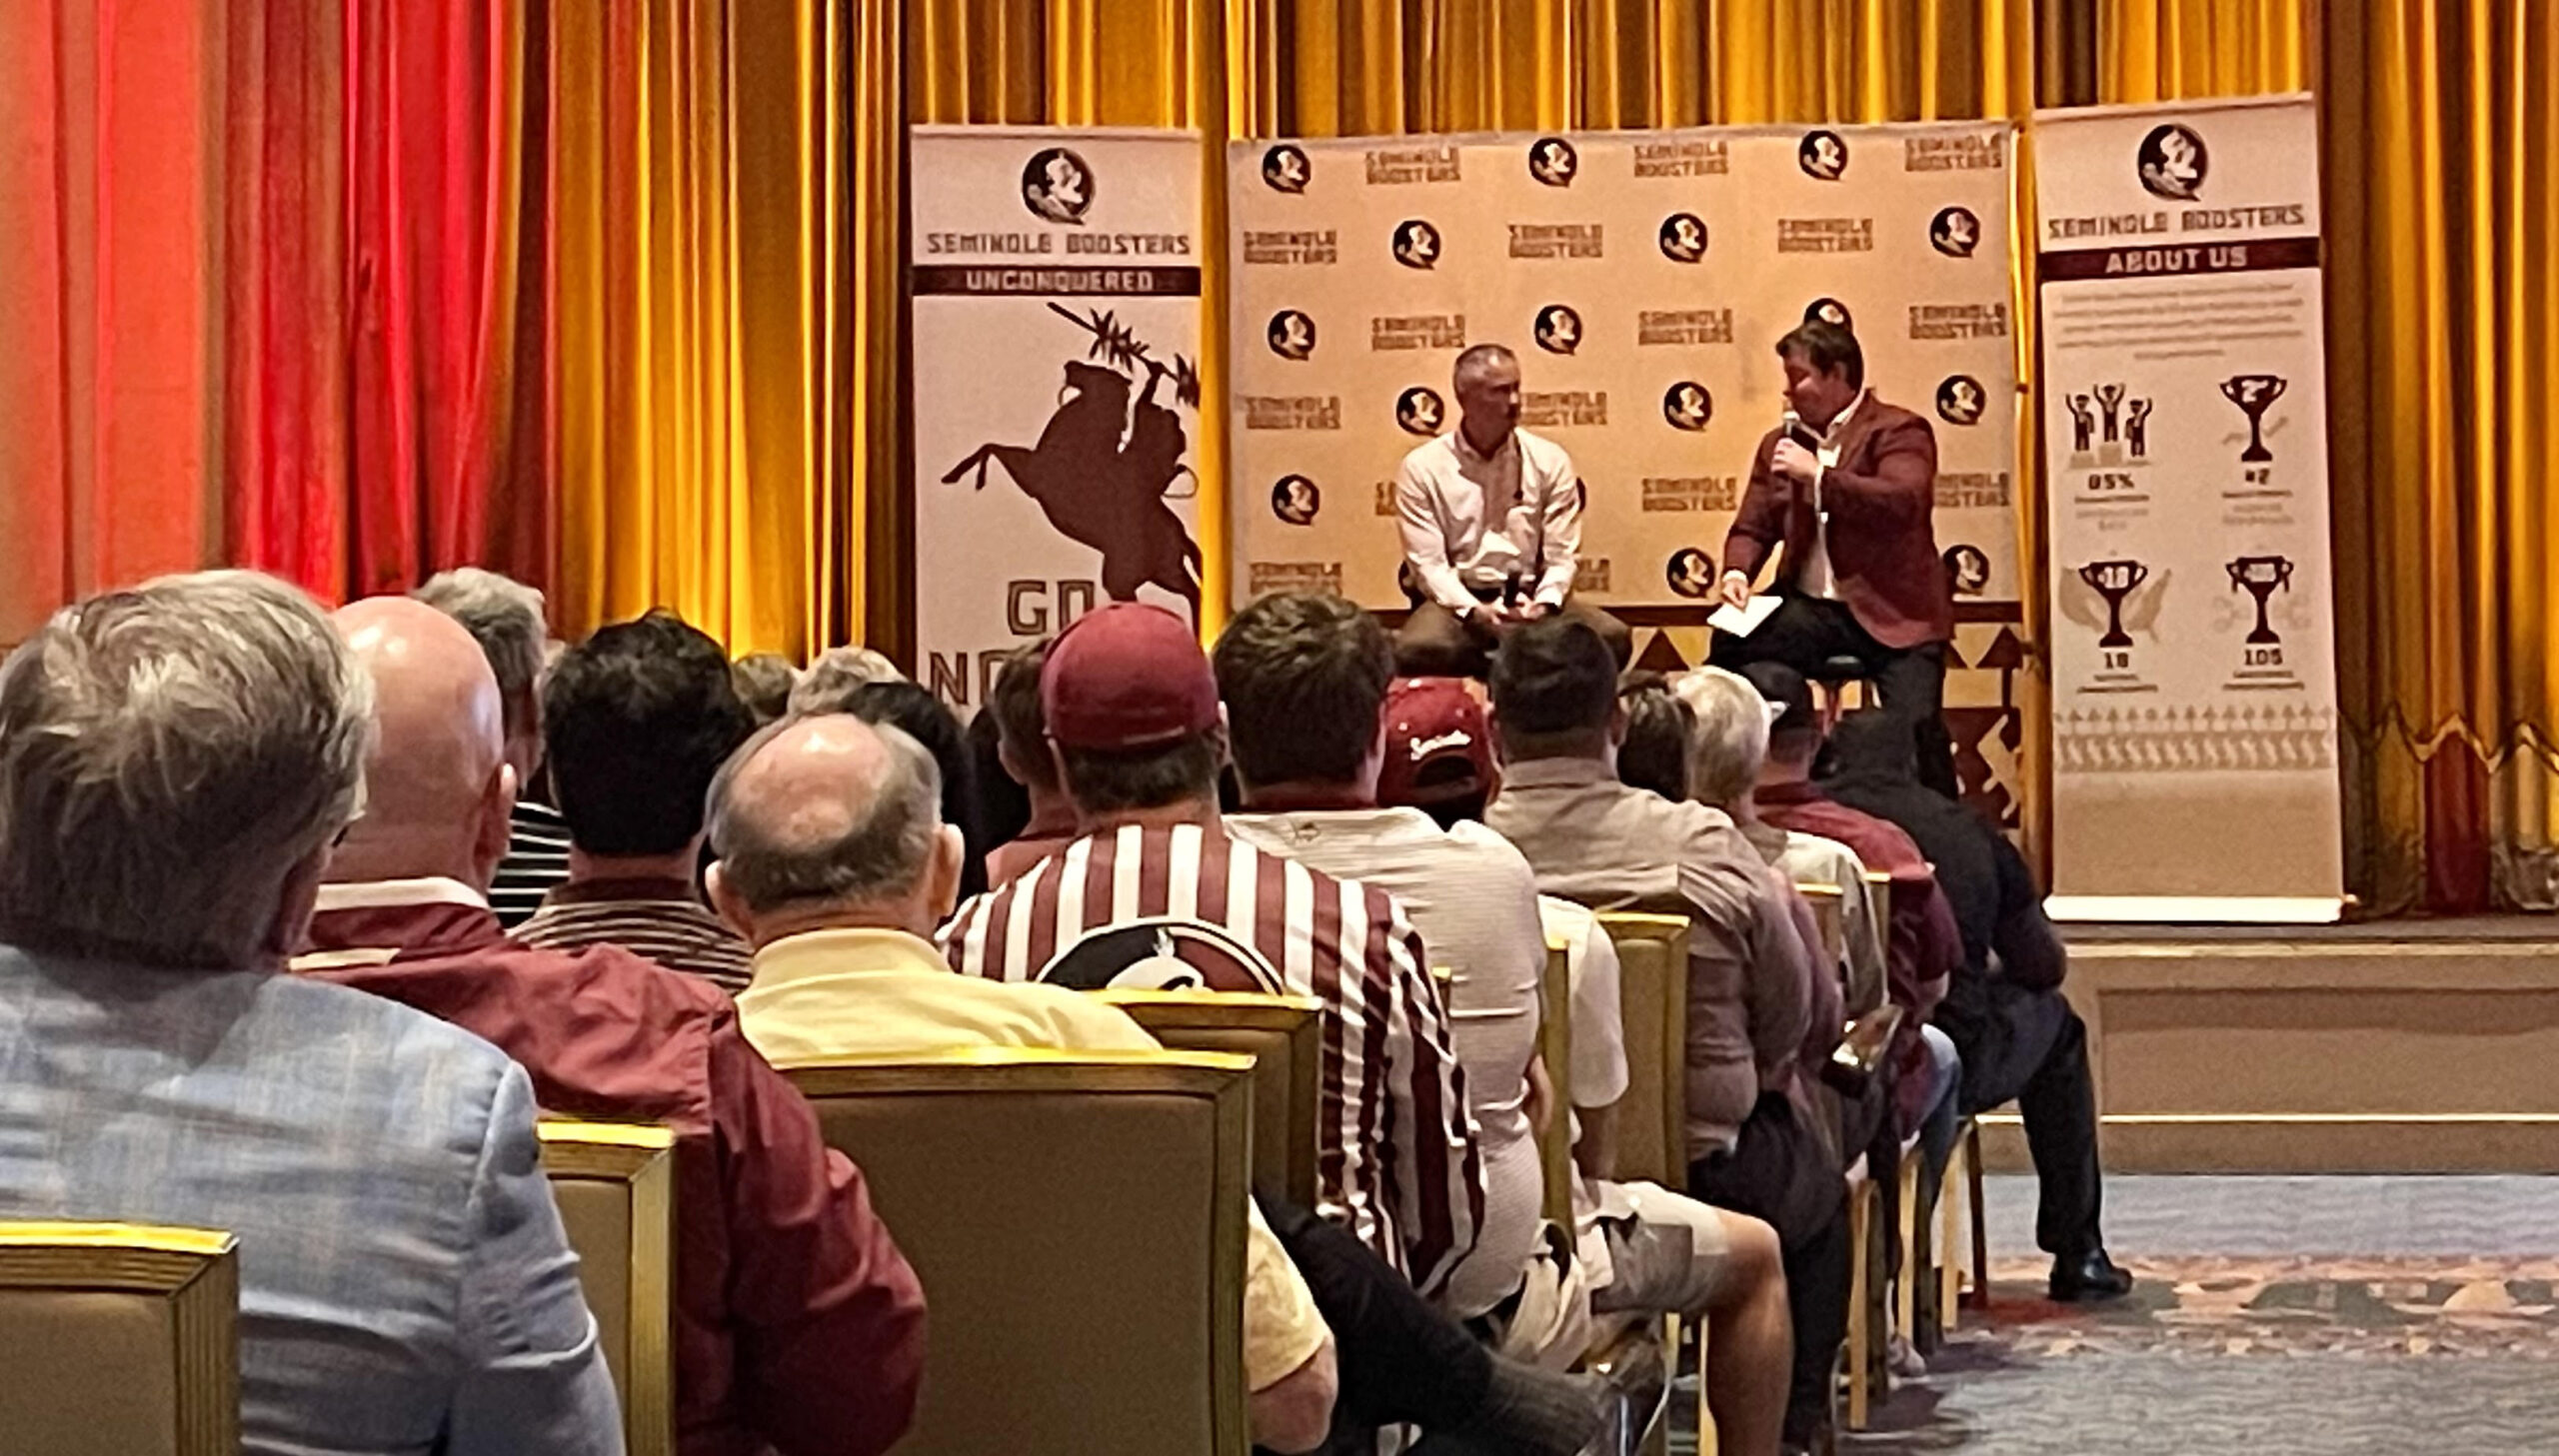 Mike Norvell fires up Florida State boosters in Atlanta: ‘We have a great team’